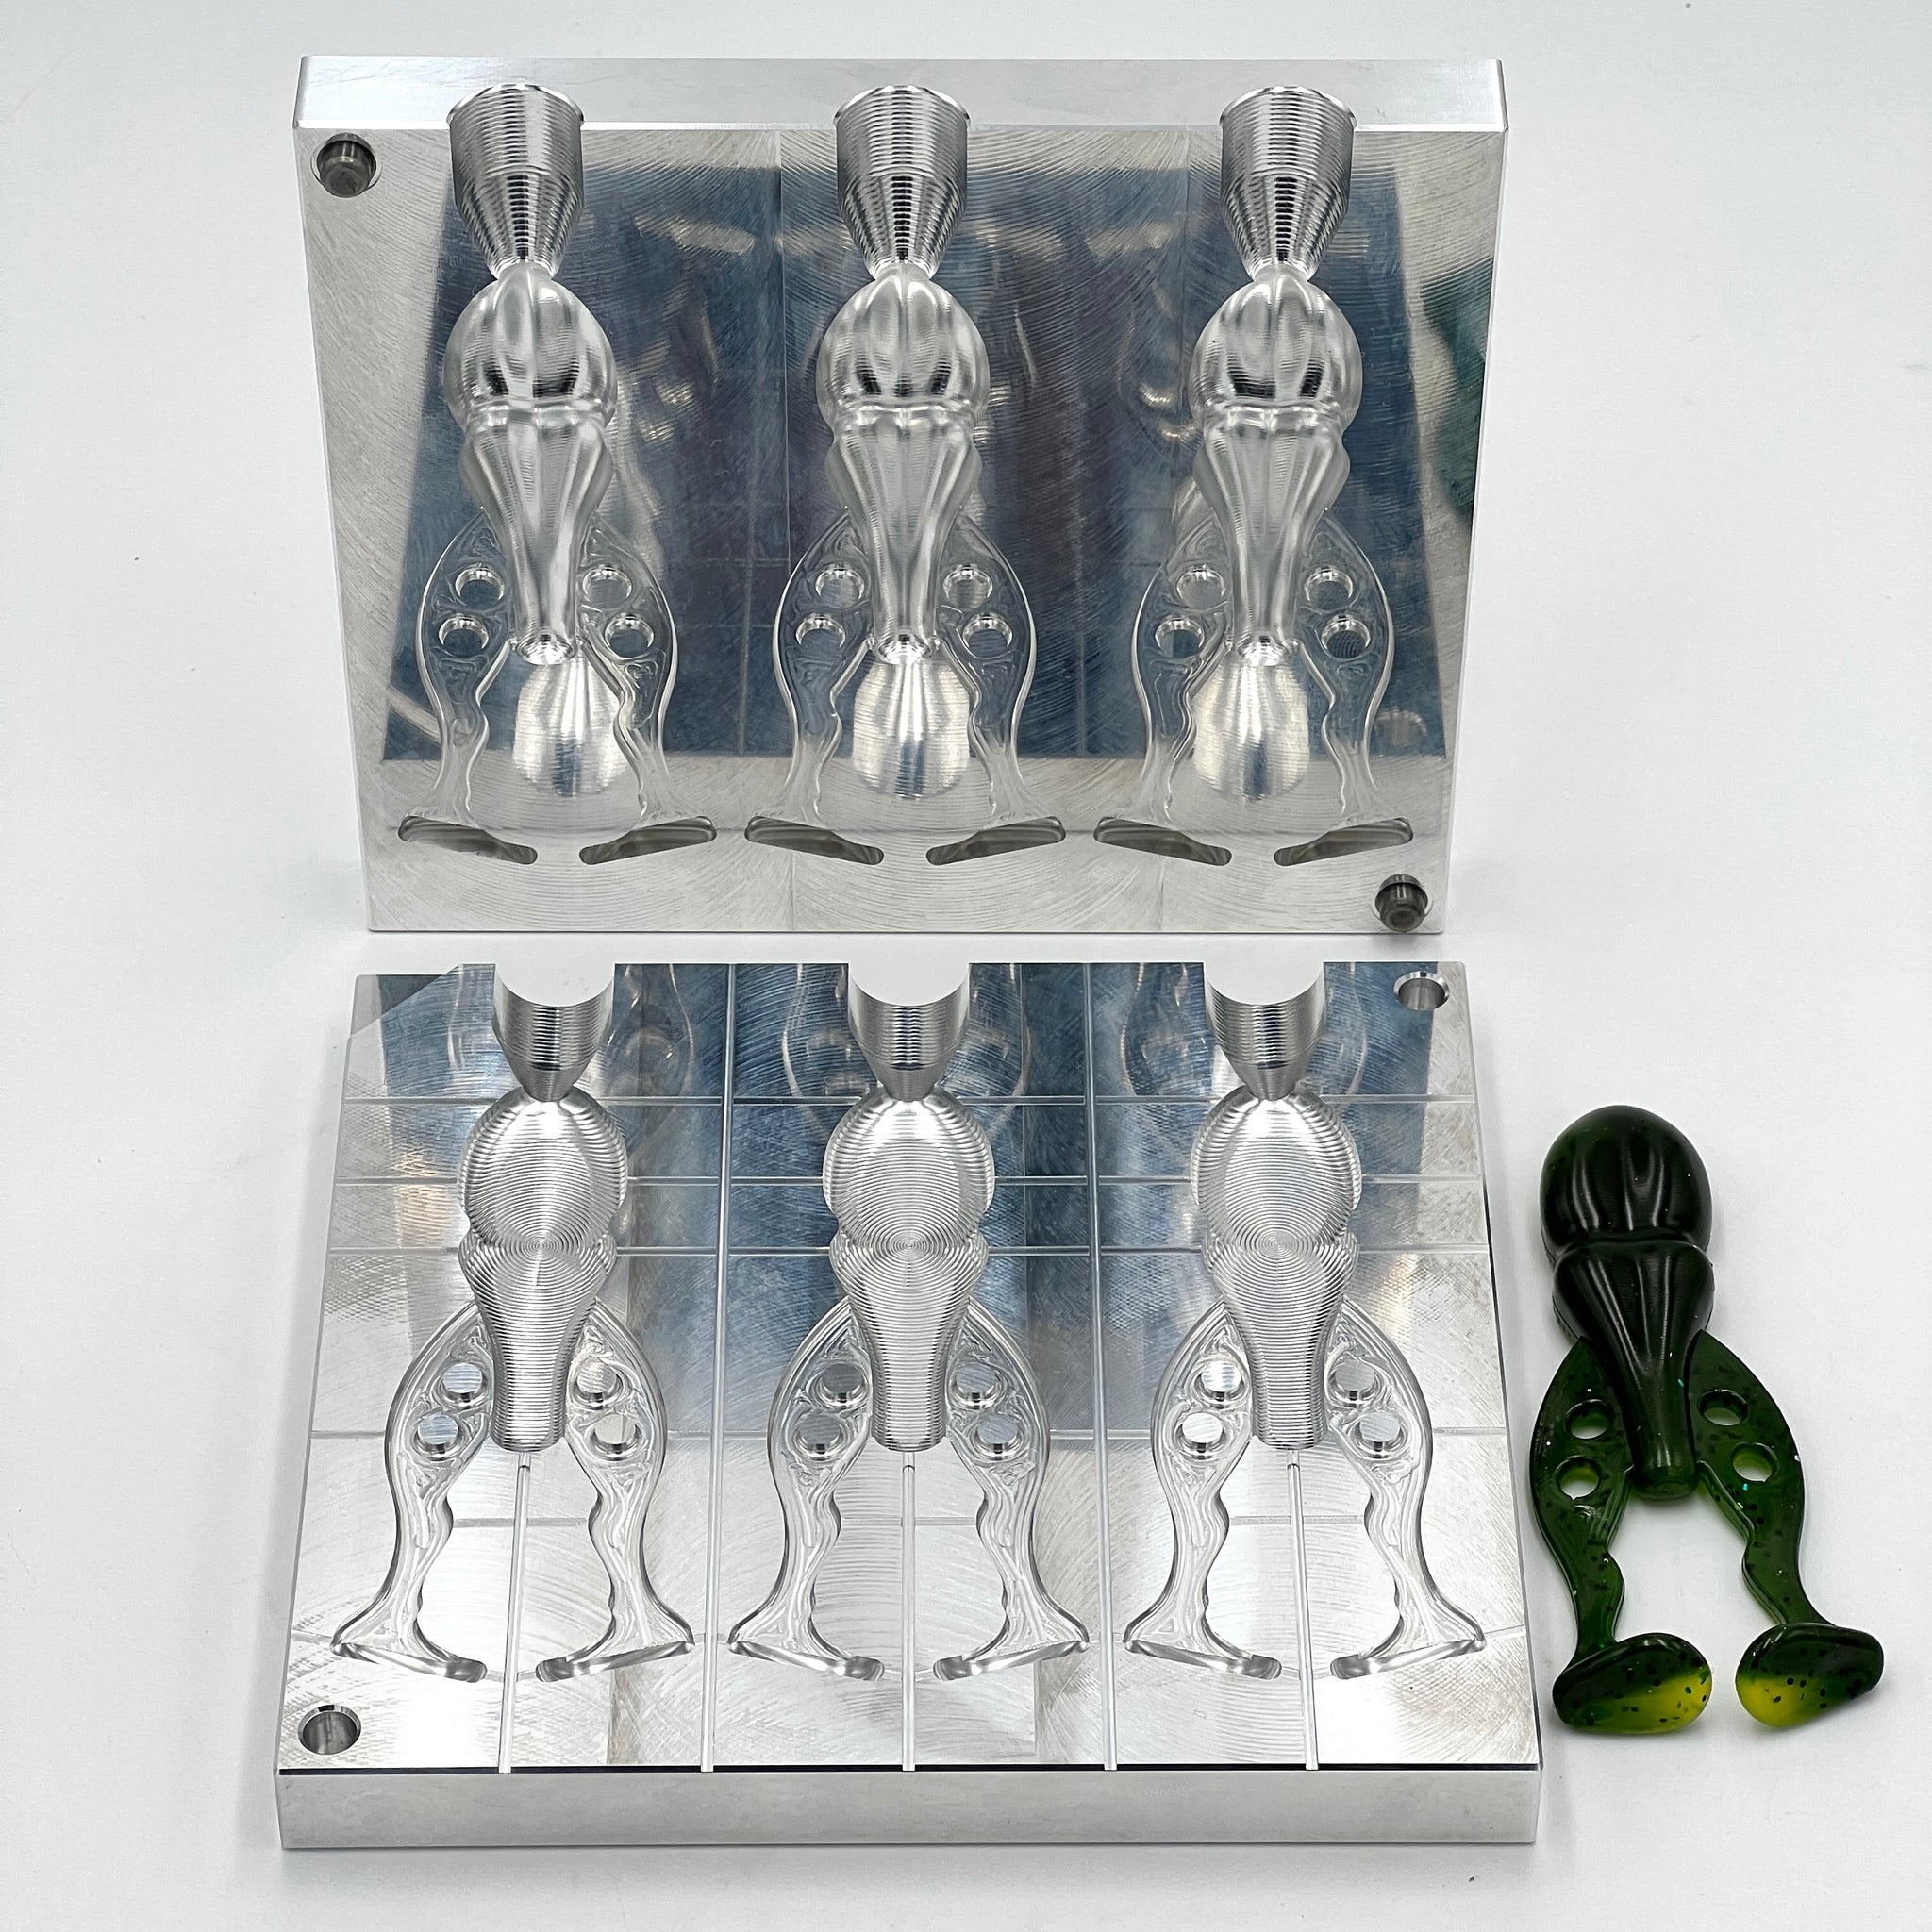 4 Inch Epic Ribbit Hand Injection Mold – Epic Bait Molds